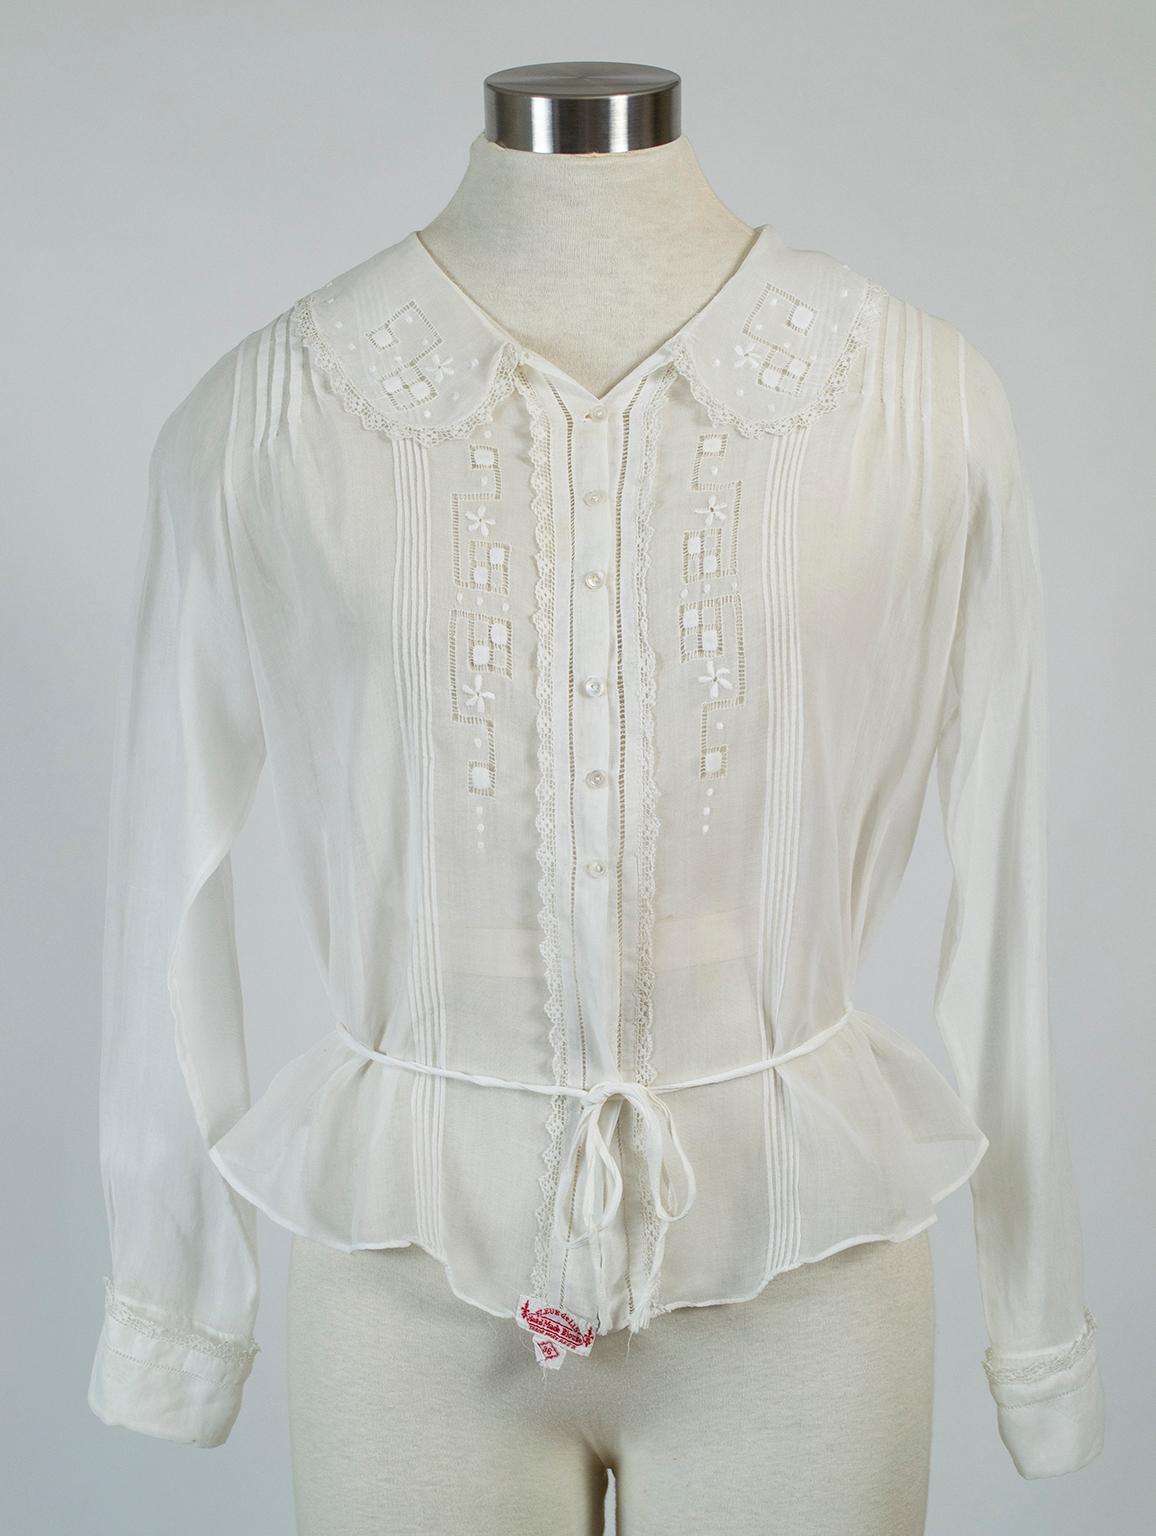 As delicate as a spider web (and almost as sheer), this blouse is an alluring exercise in concealing and revealing: though every inch of skin is covered, its gossamer lightness allows you to see right through it. Victorian-era details like pintucks,